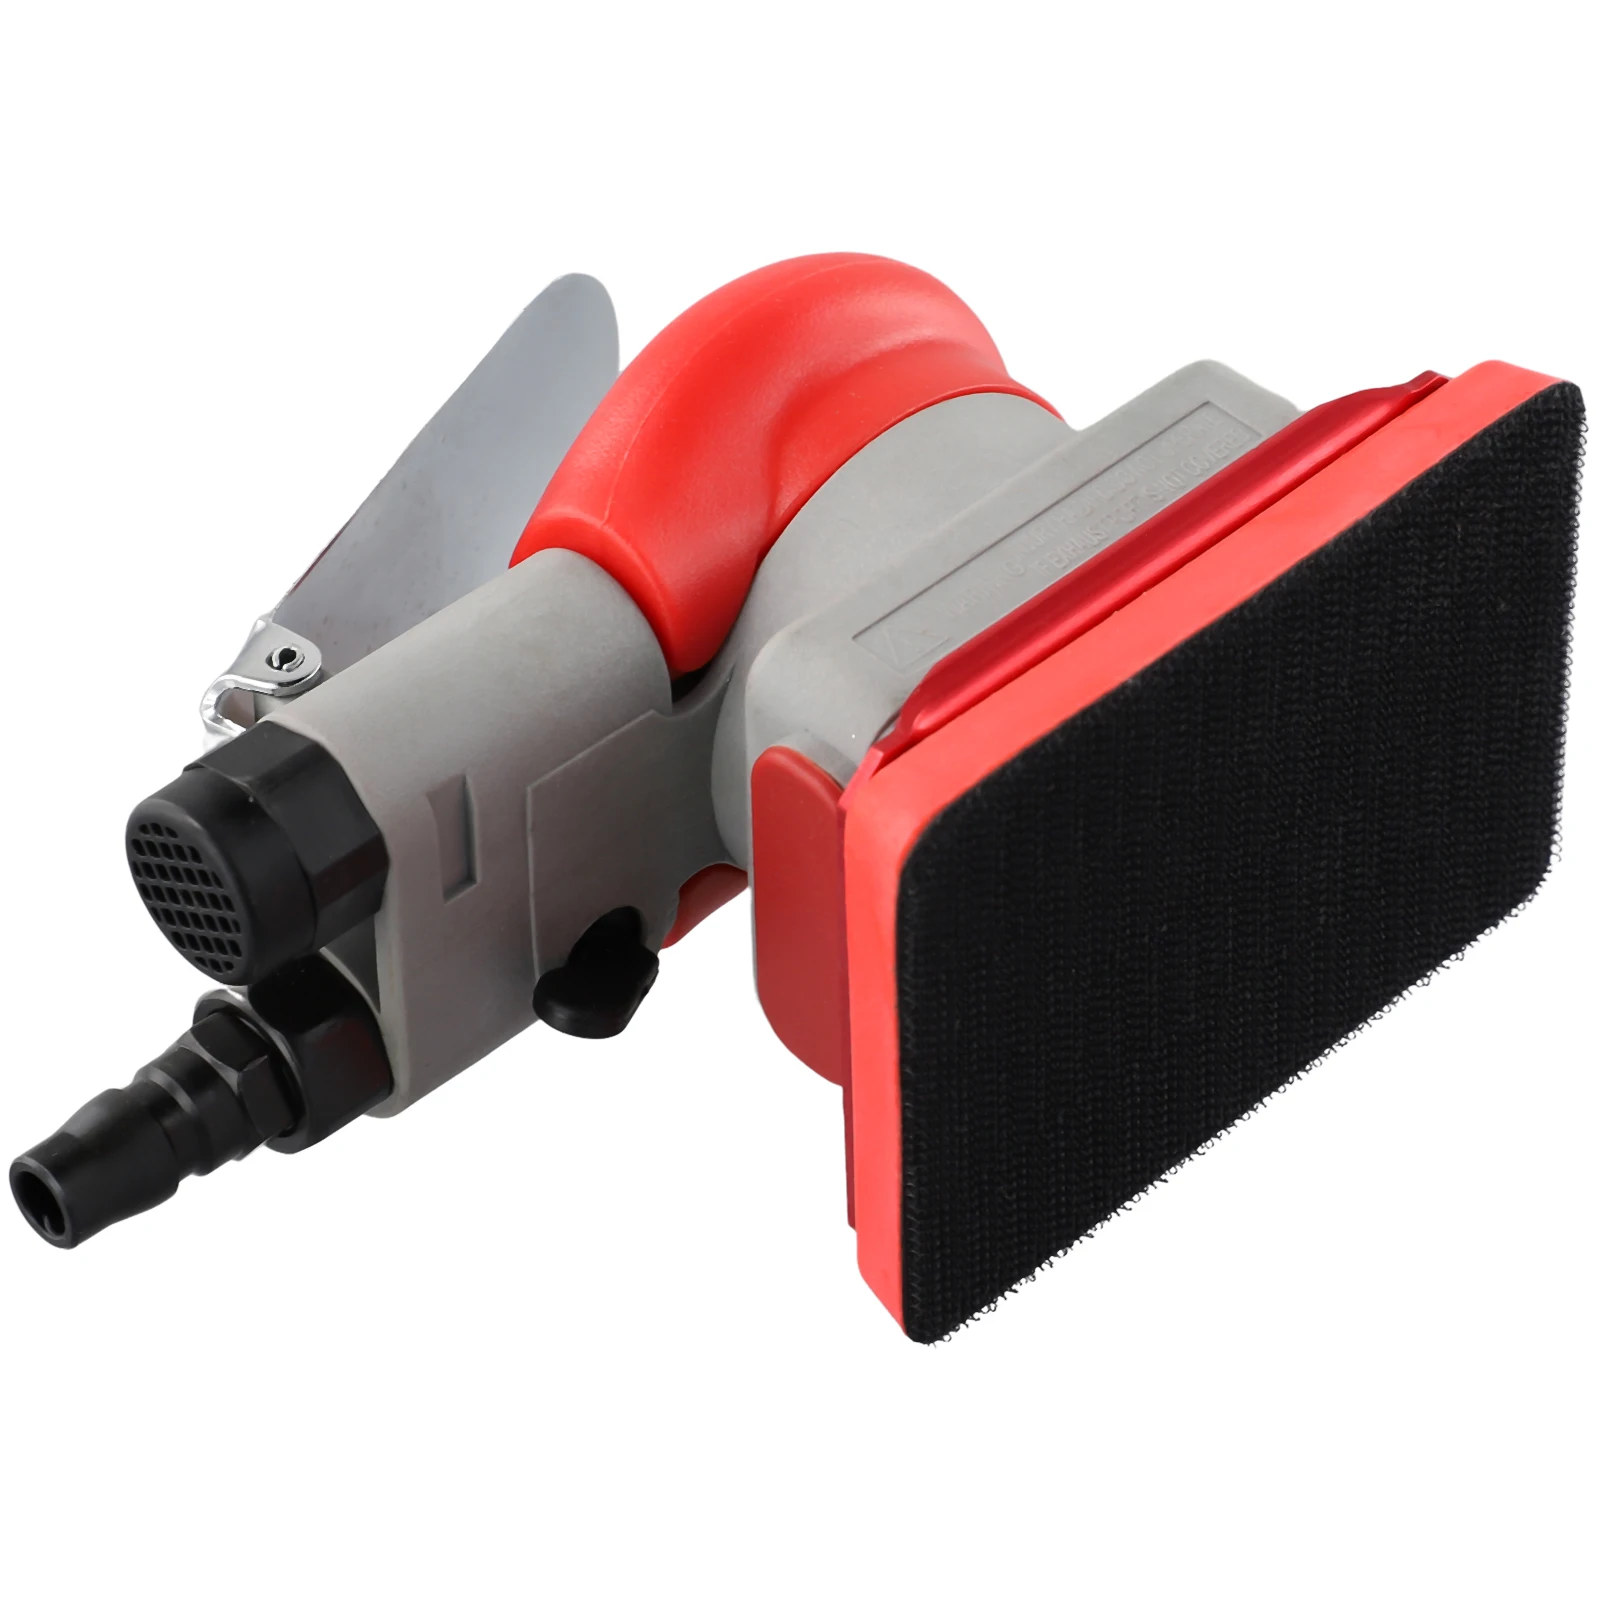 

Polishing Tools Pneumatic Sander Metal Grinding Rust Removal Square Wood Grinding 1/4 Inch Air Inlet Joint Finishing Sander